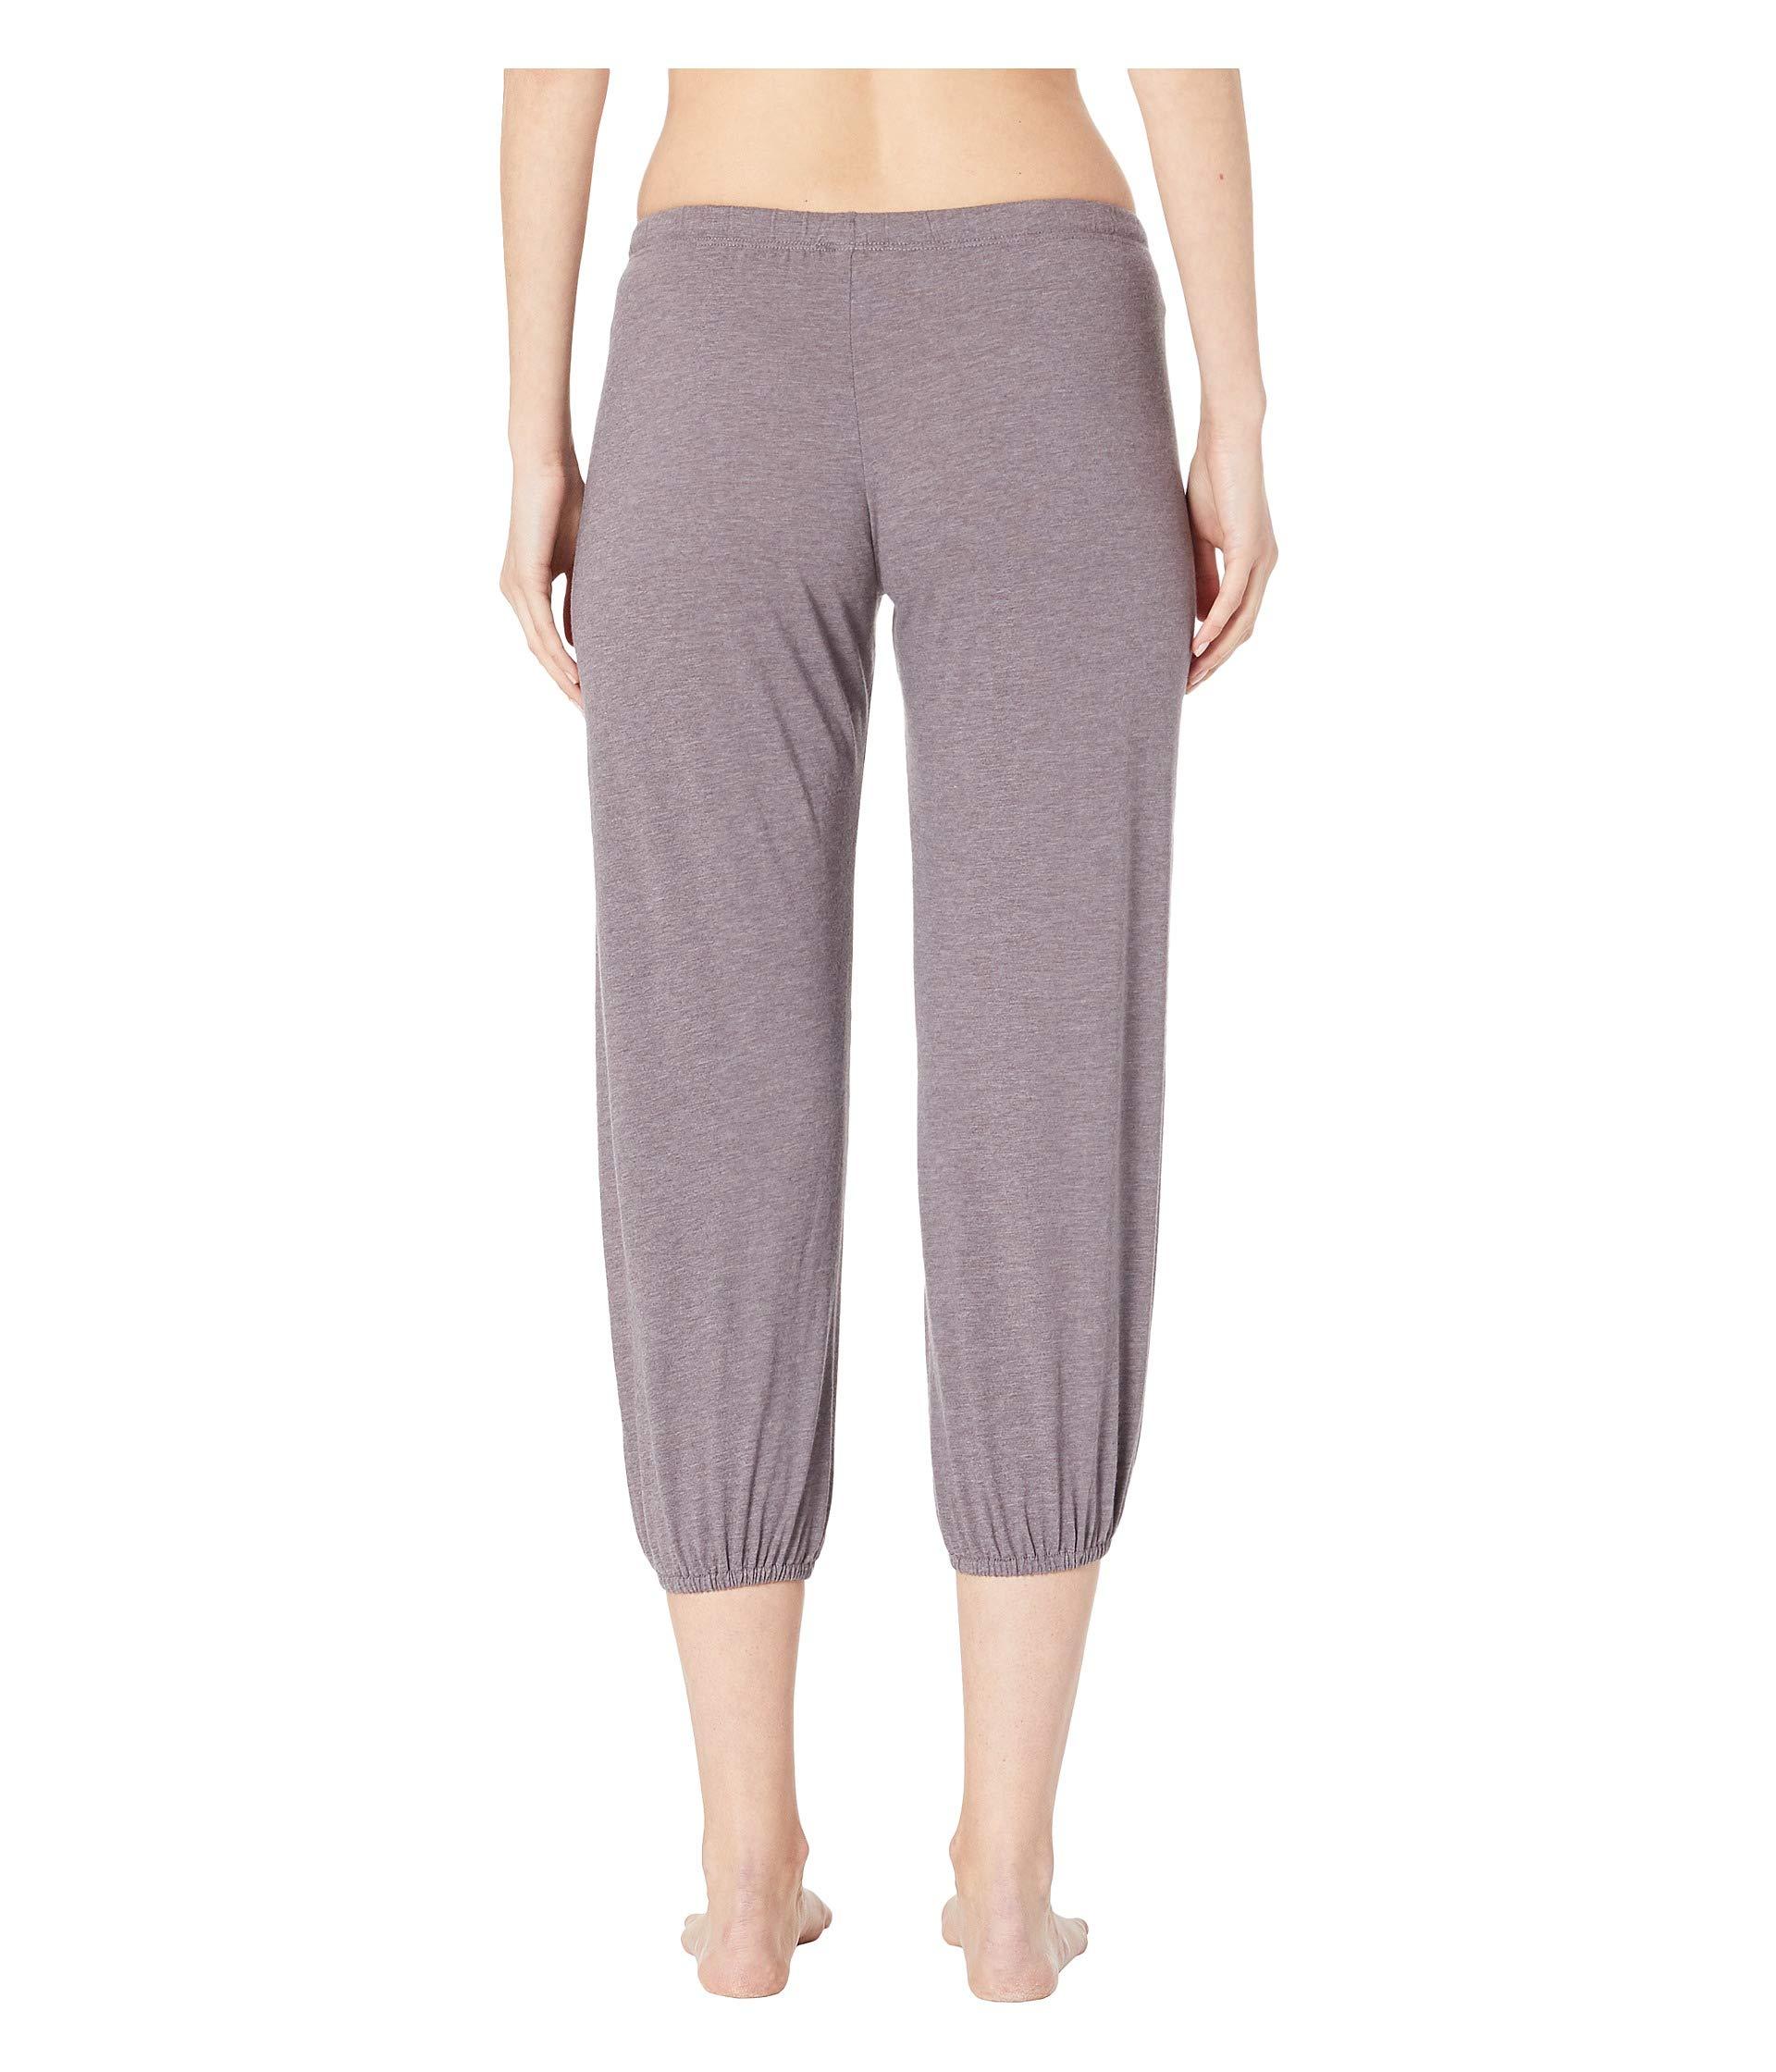 Eberjey Cotton Heather - The Toreador Pants in Gray - Lyst